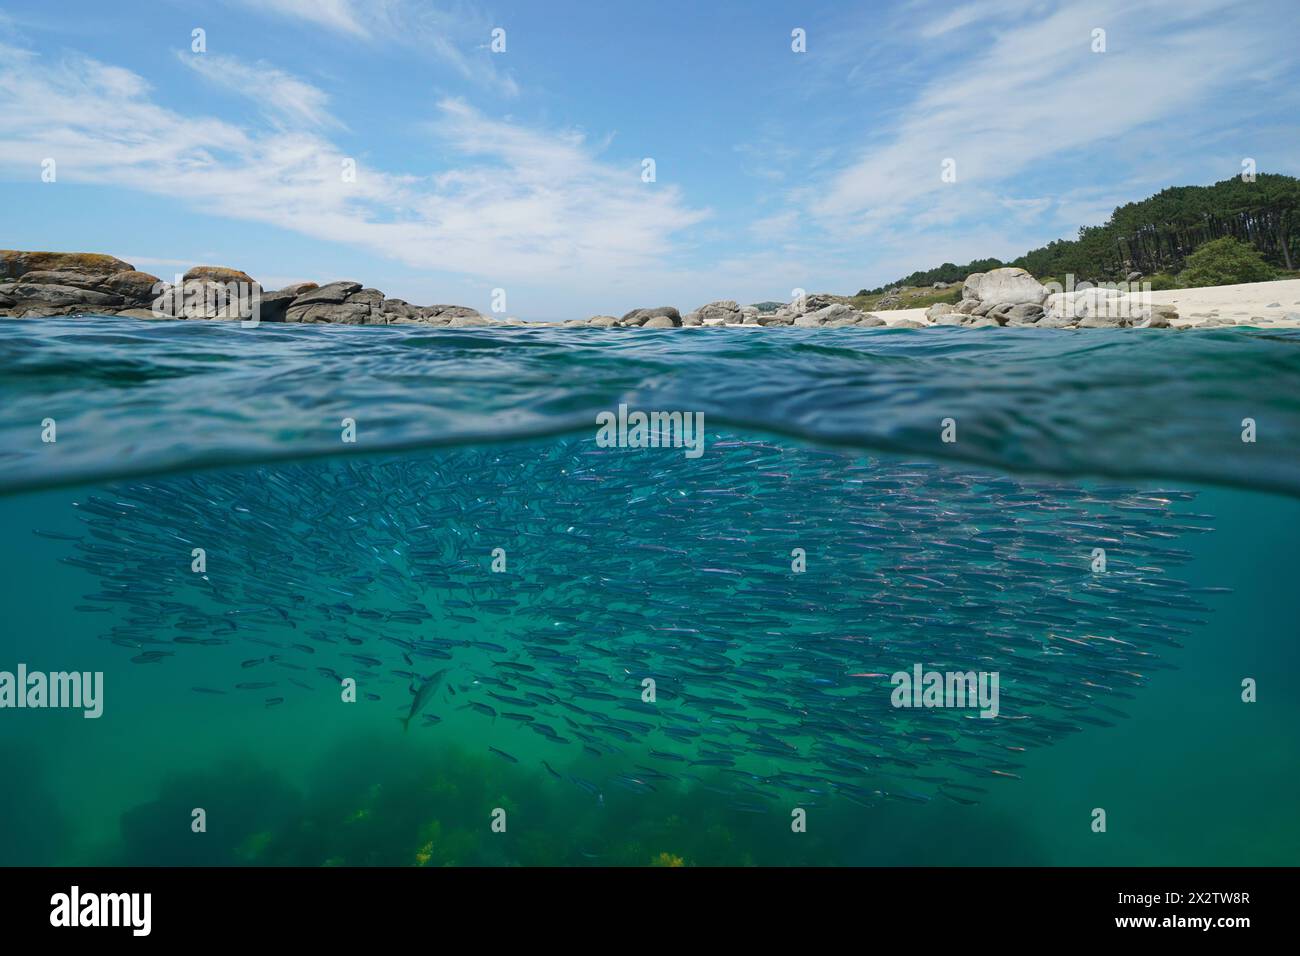 School of anchovy fish underwater in the Atlantic ocean near the coastline, split view over and under water surface, natural scene, Spain, Galicia Stock Photo